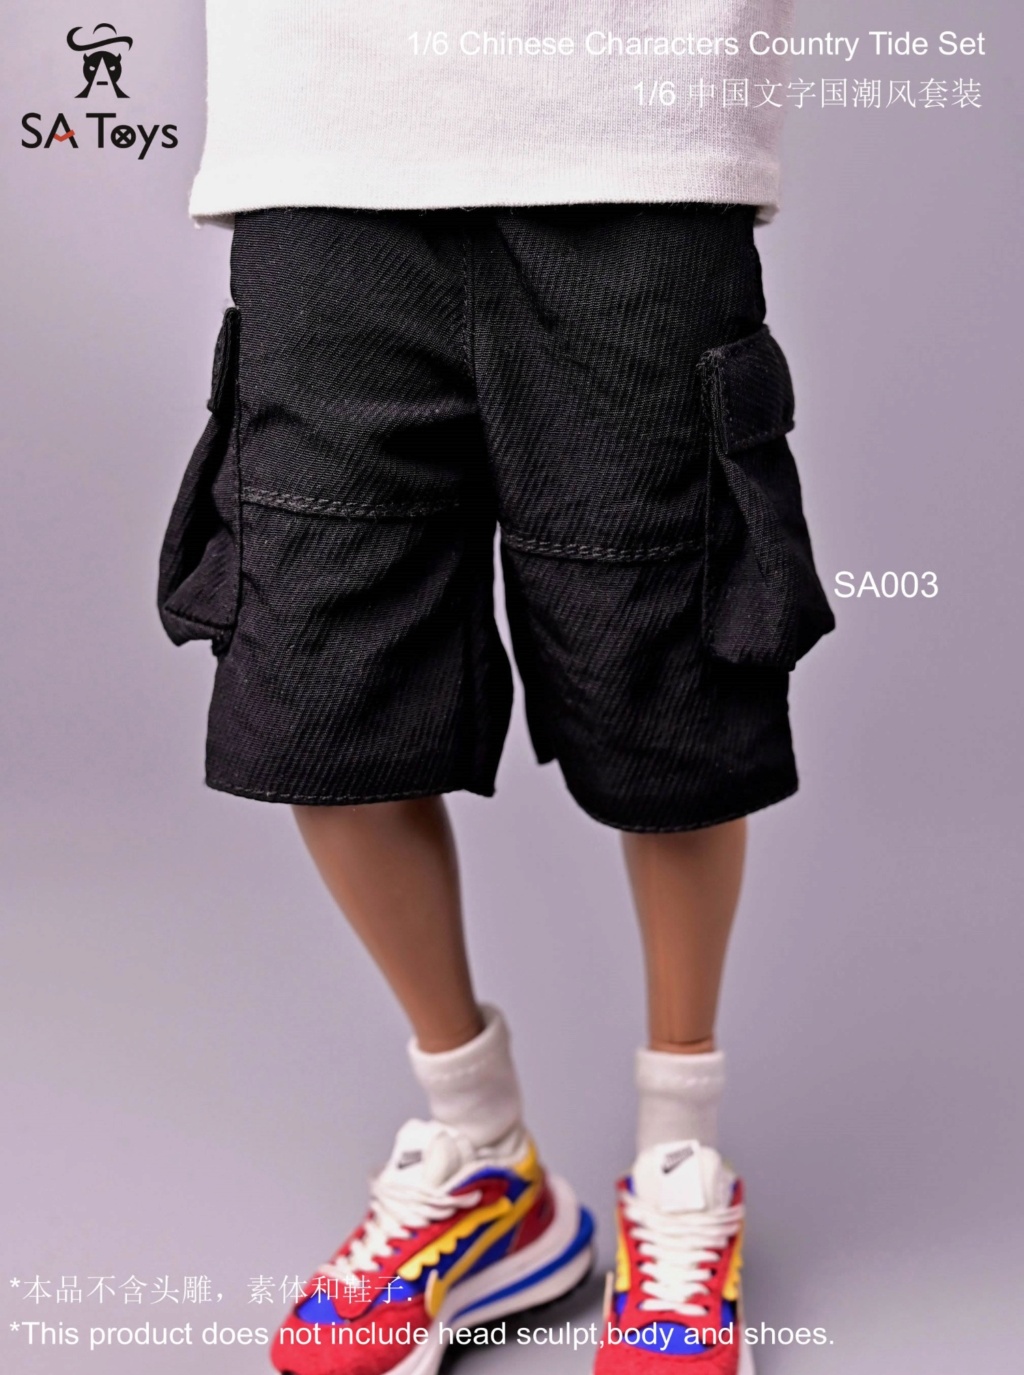 accessory - NEW PRODUCT: SA Toys：1/6 Multi color Chinese style men's clothing 11075811